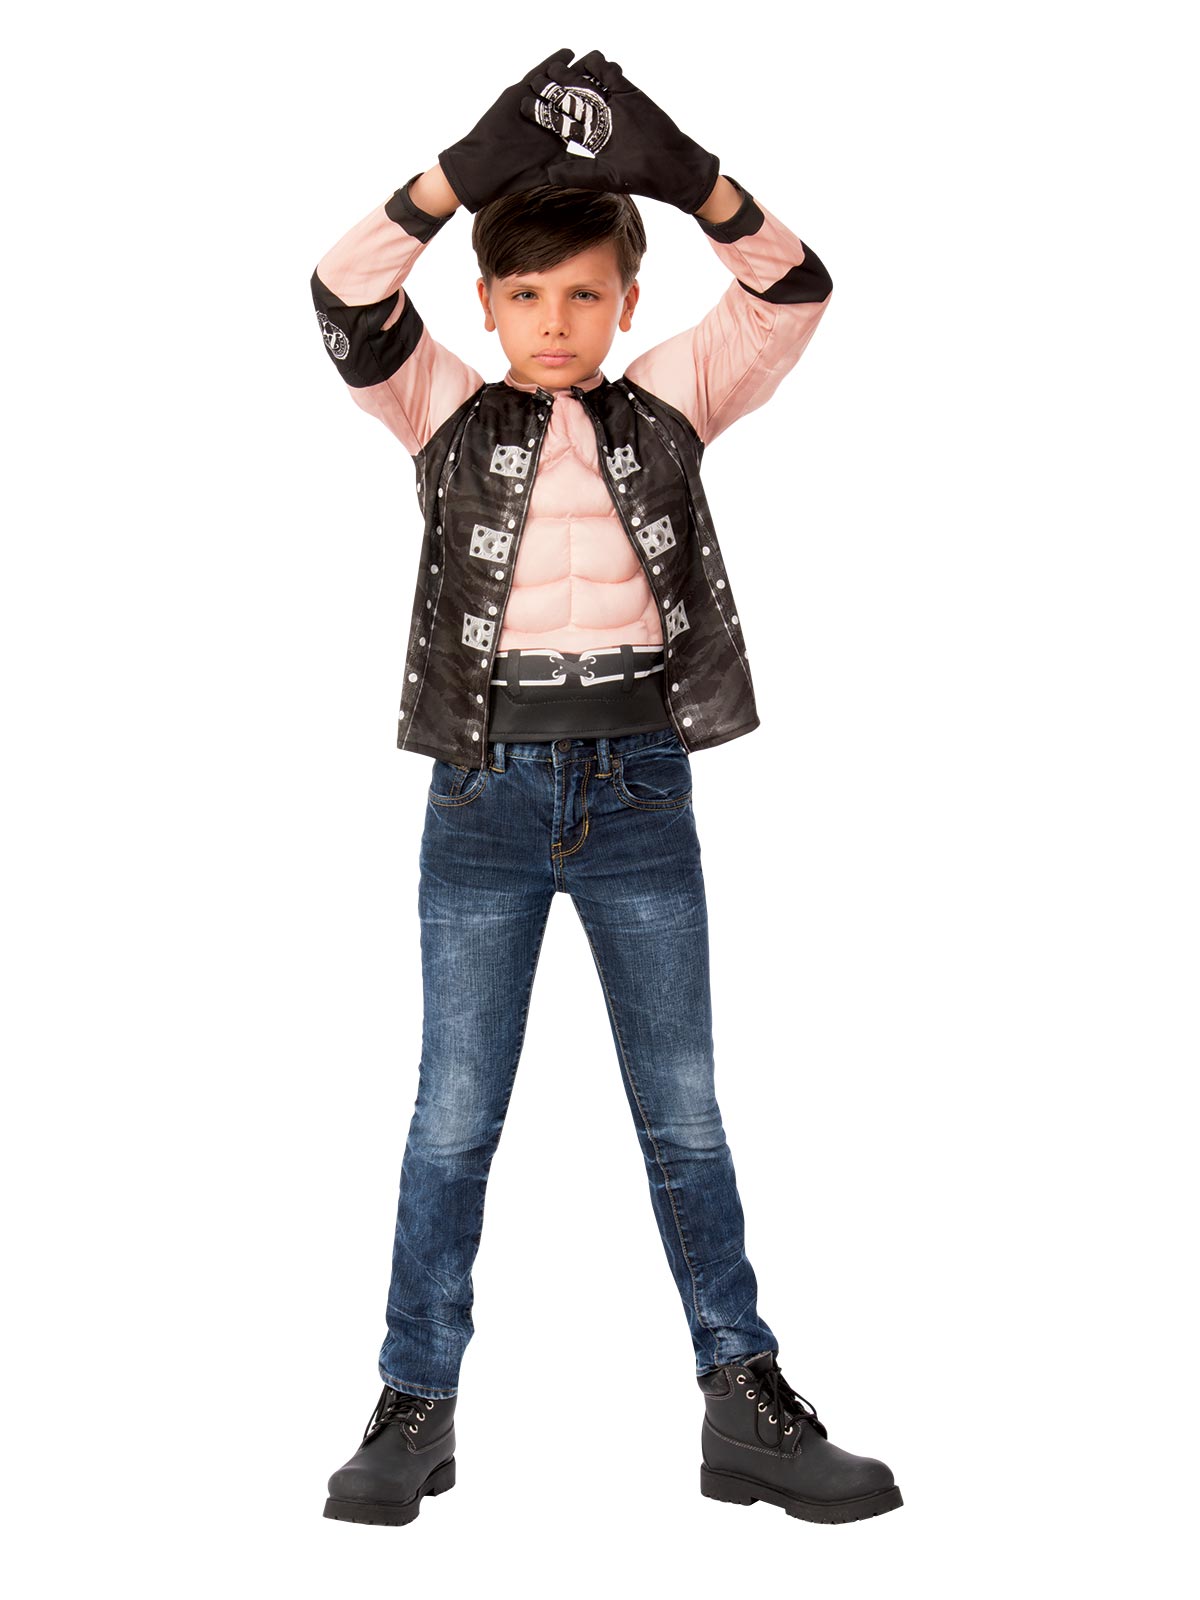 WWE AJ Styles Child Costume with Top and Gloves